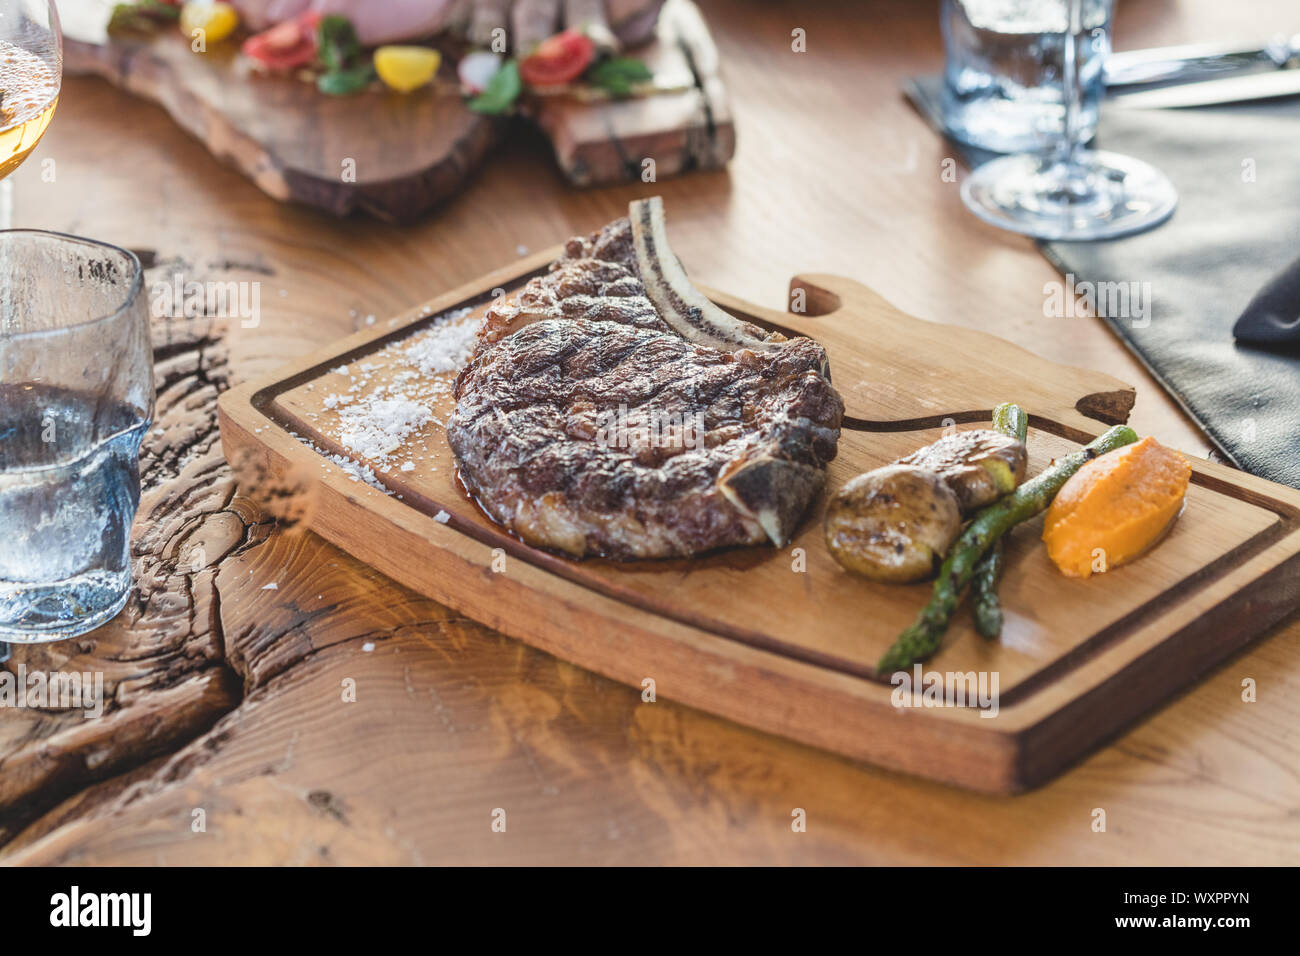 Grilled beef  chop served on wooden serving plate with  grilled vegetables Stock Photo